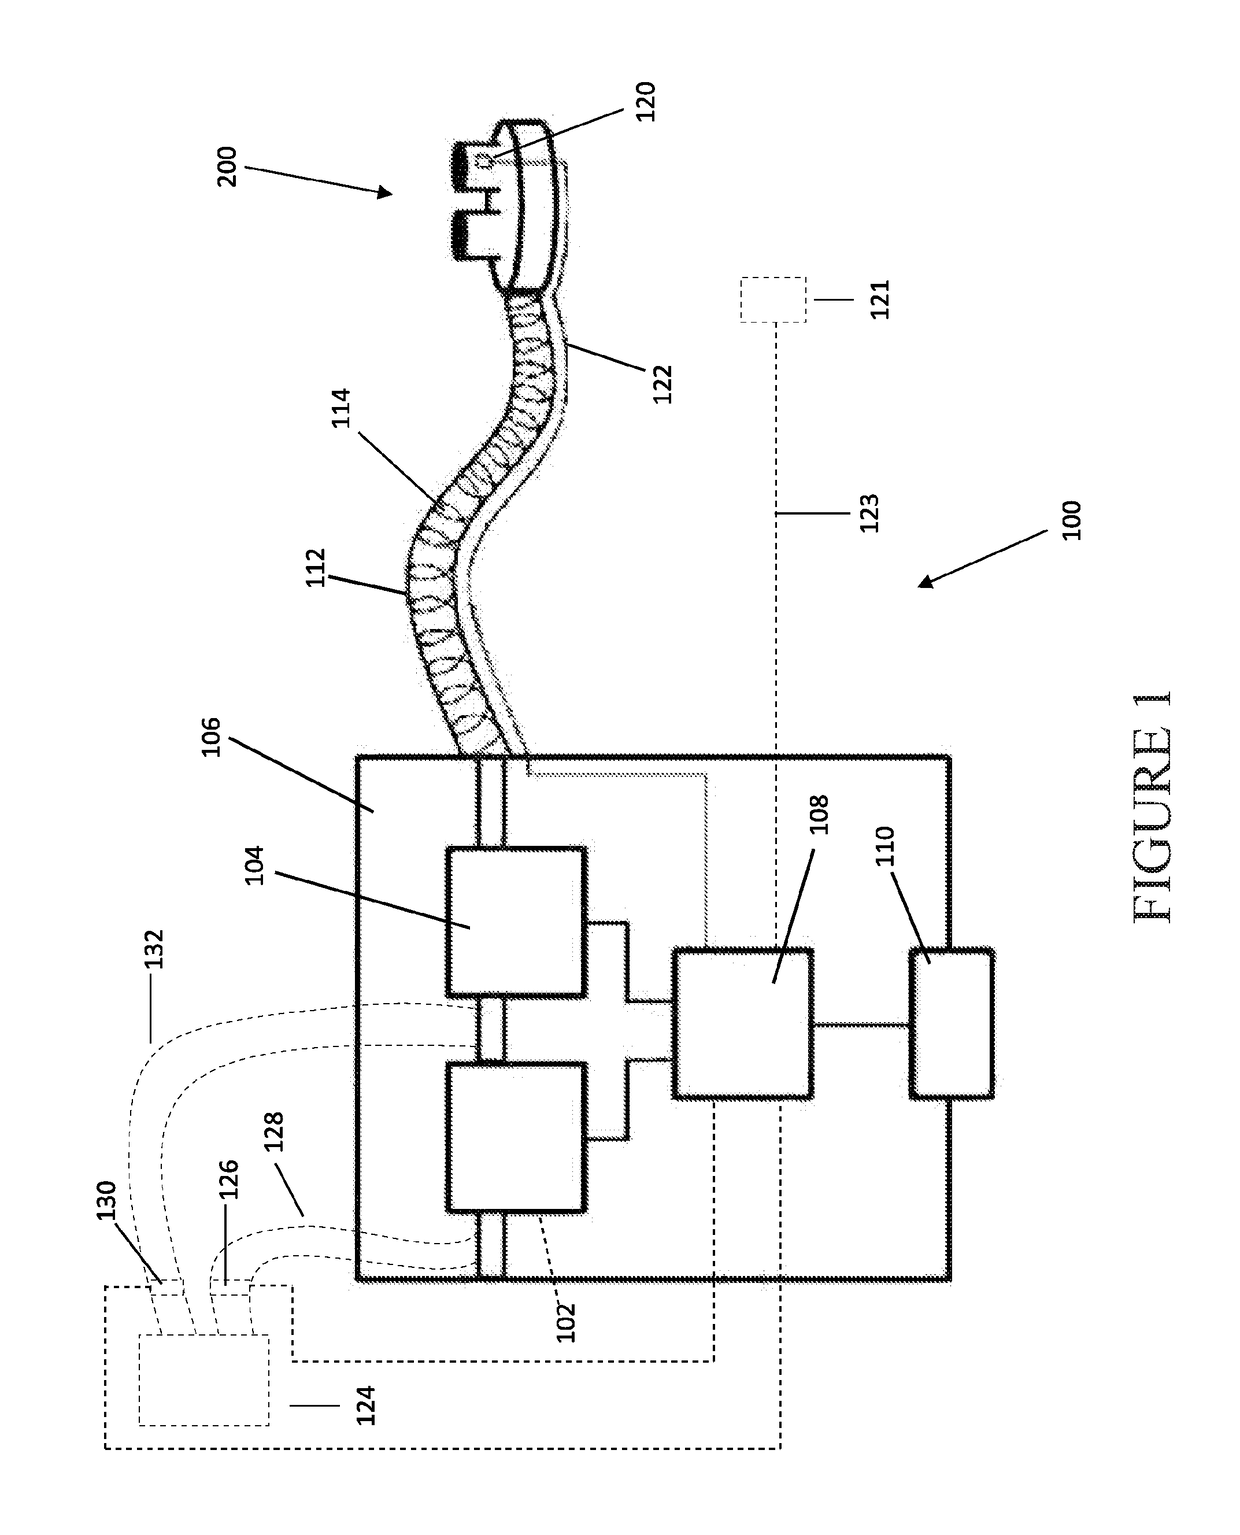 A user interface and system for supplying gases to an airway